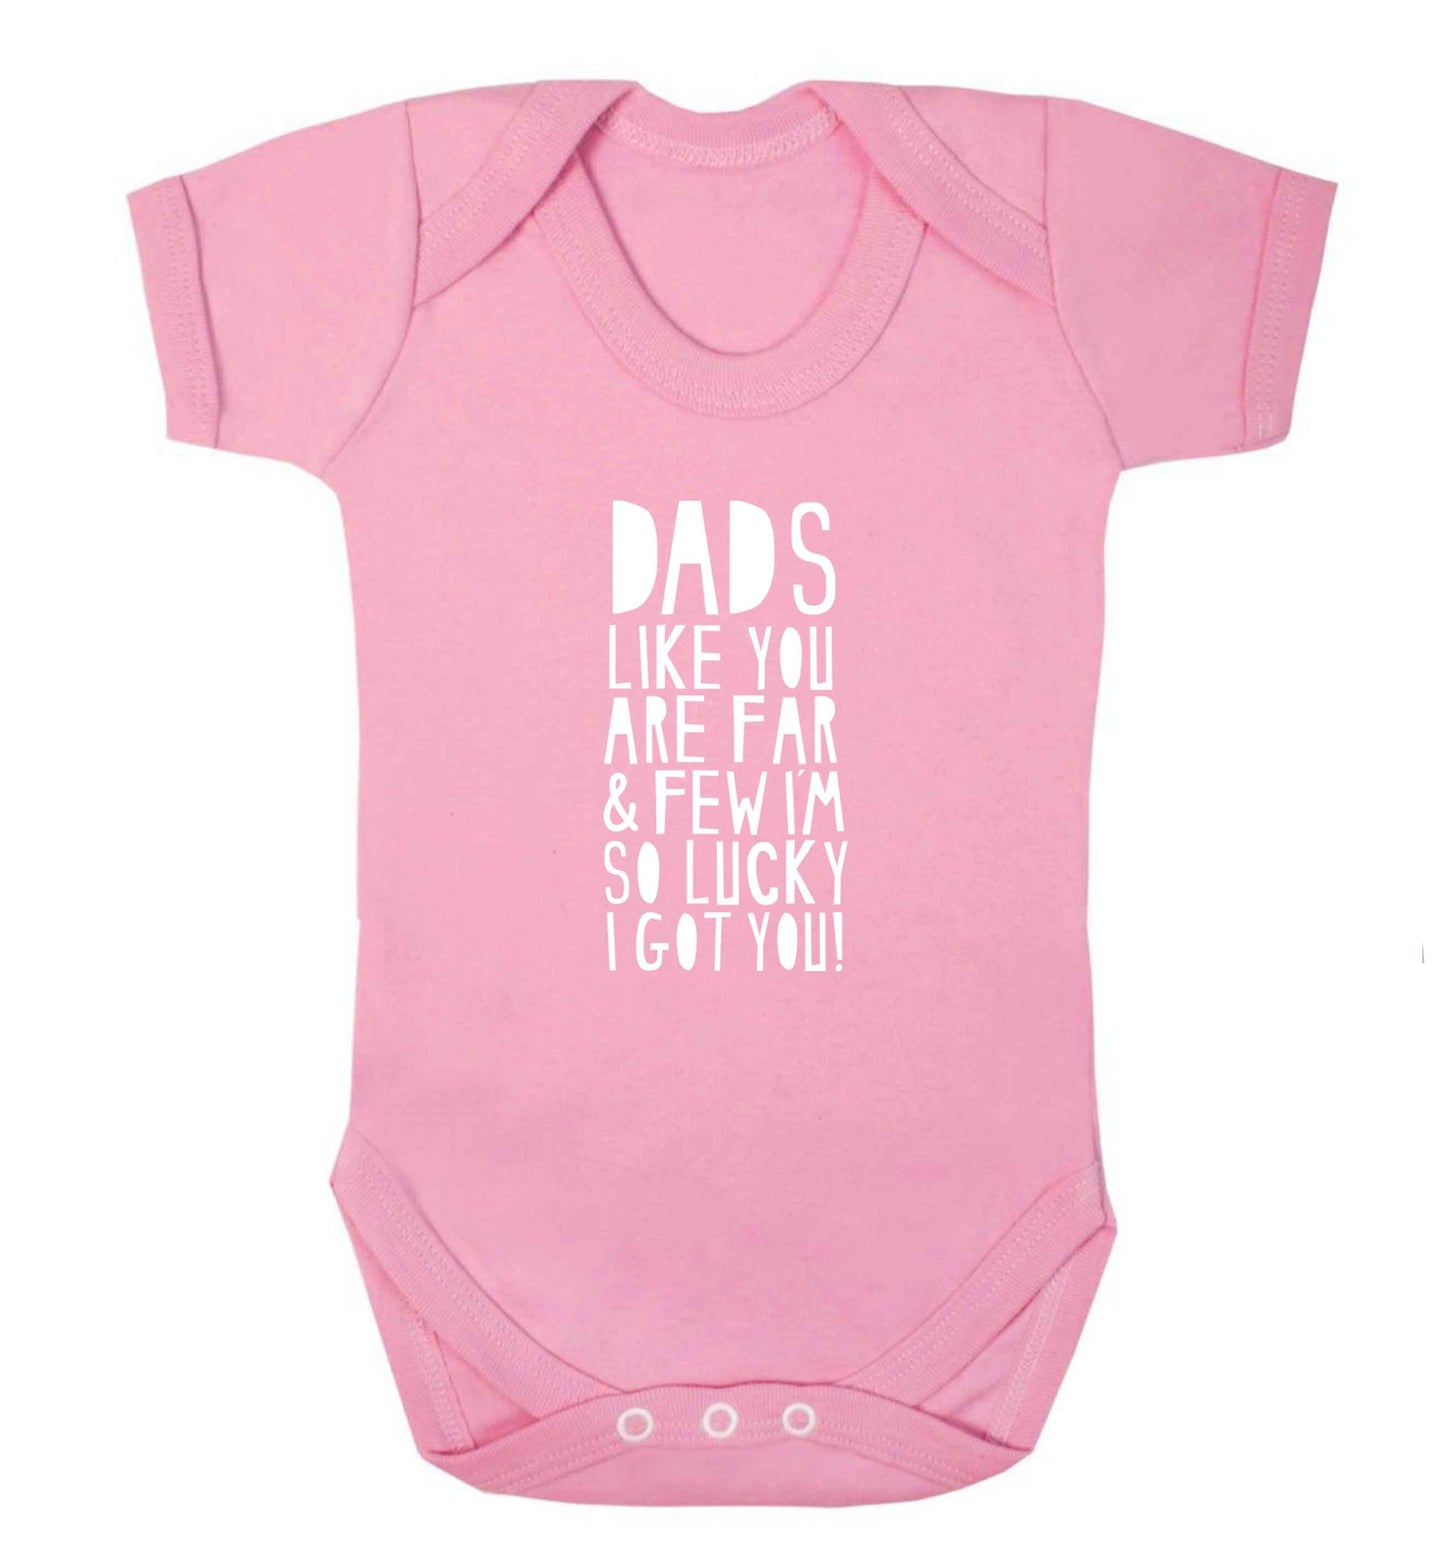 Dads like you are far and few I'm so luck I got you! baby vest pale pink 18-24 months